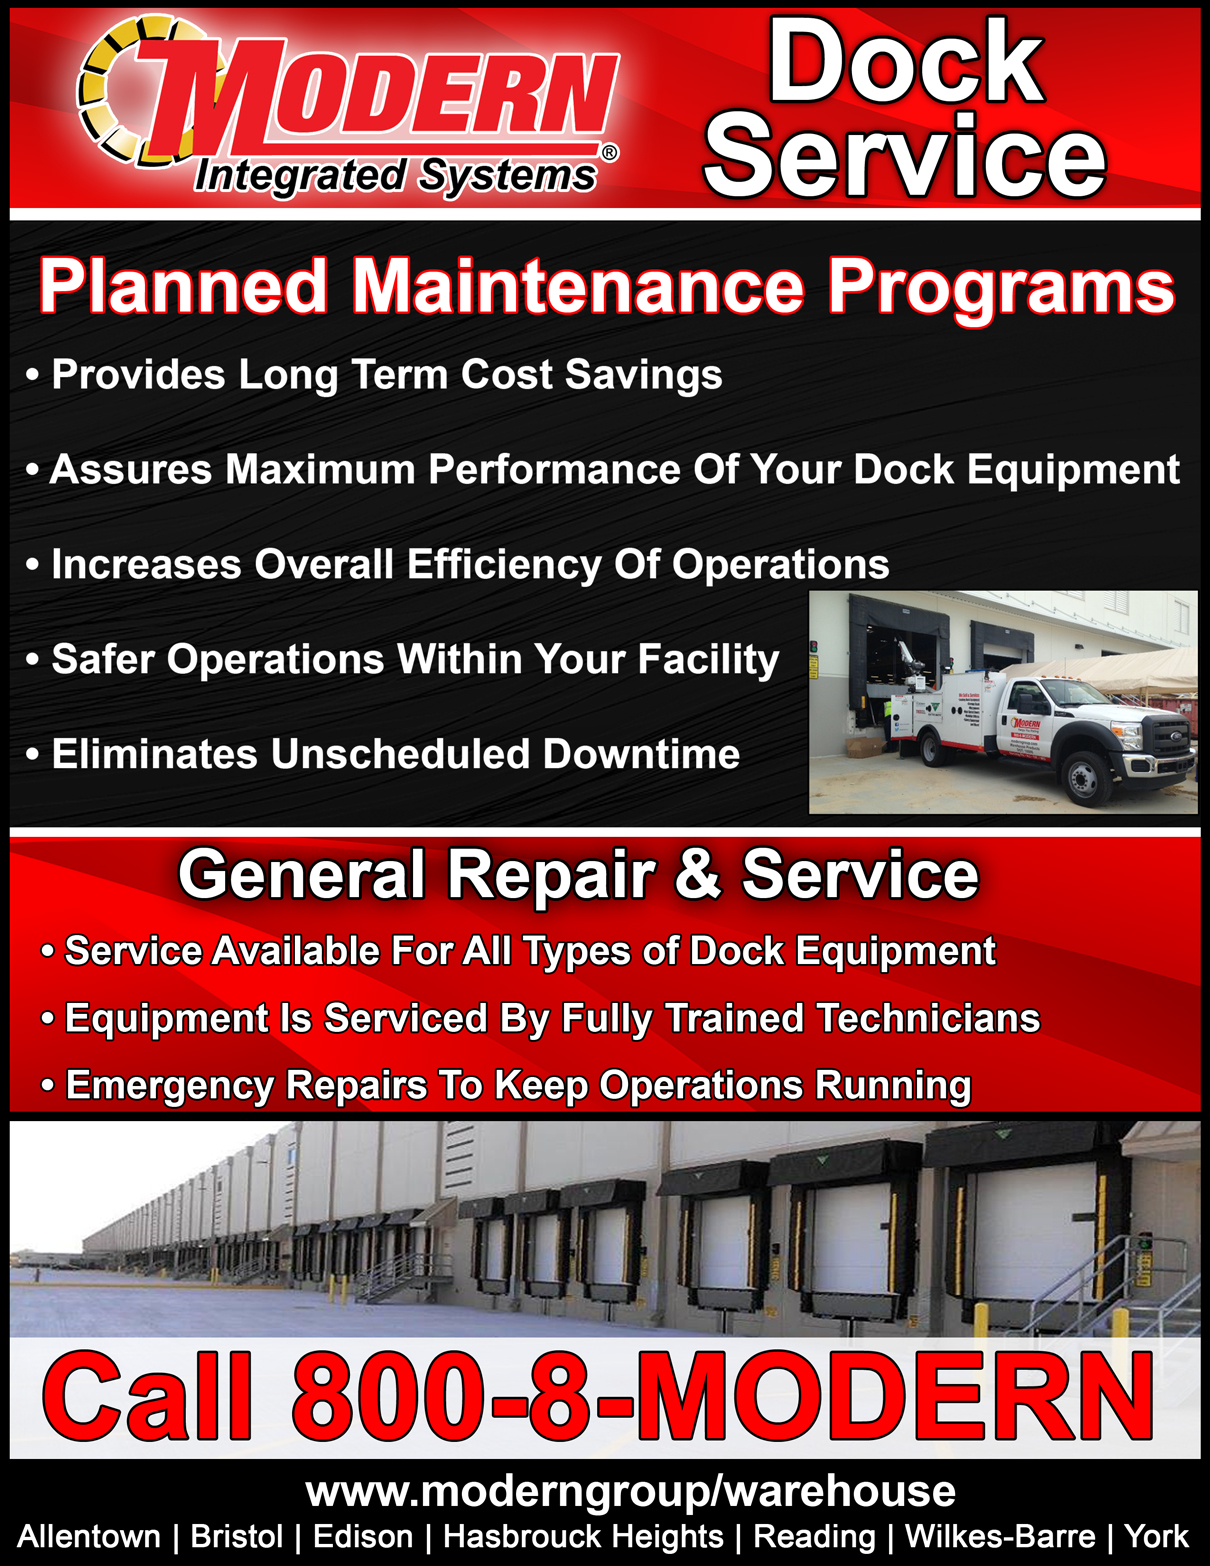 An Overview of Modern's Dock and Door Service Options.